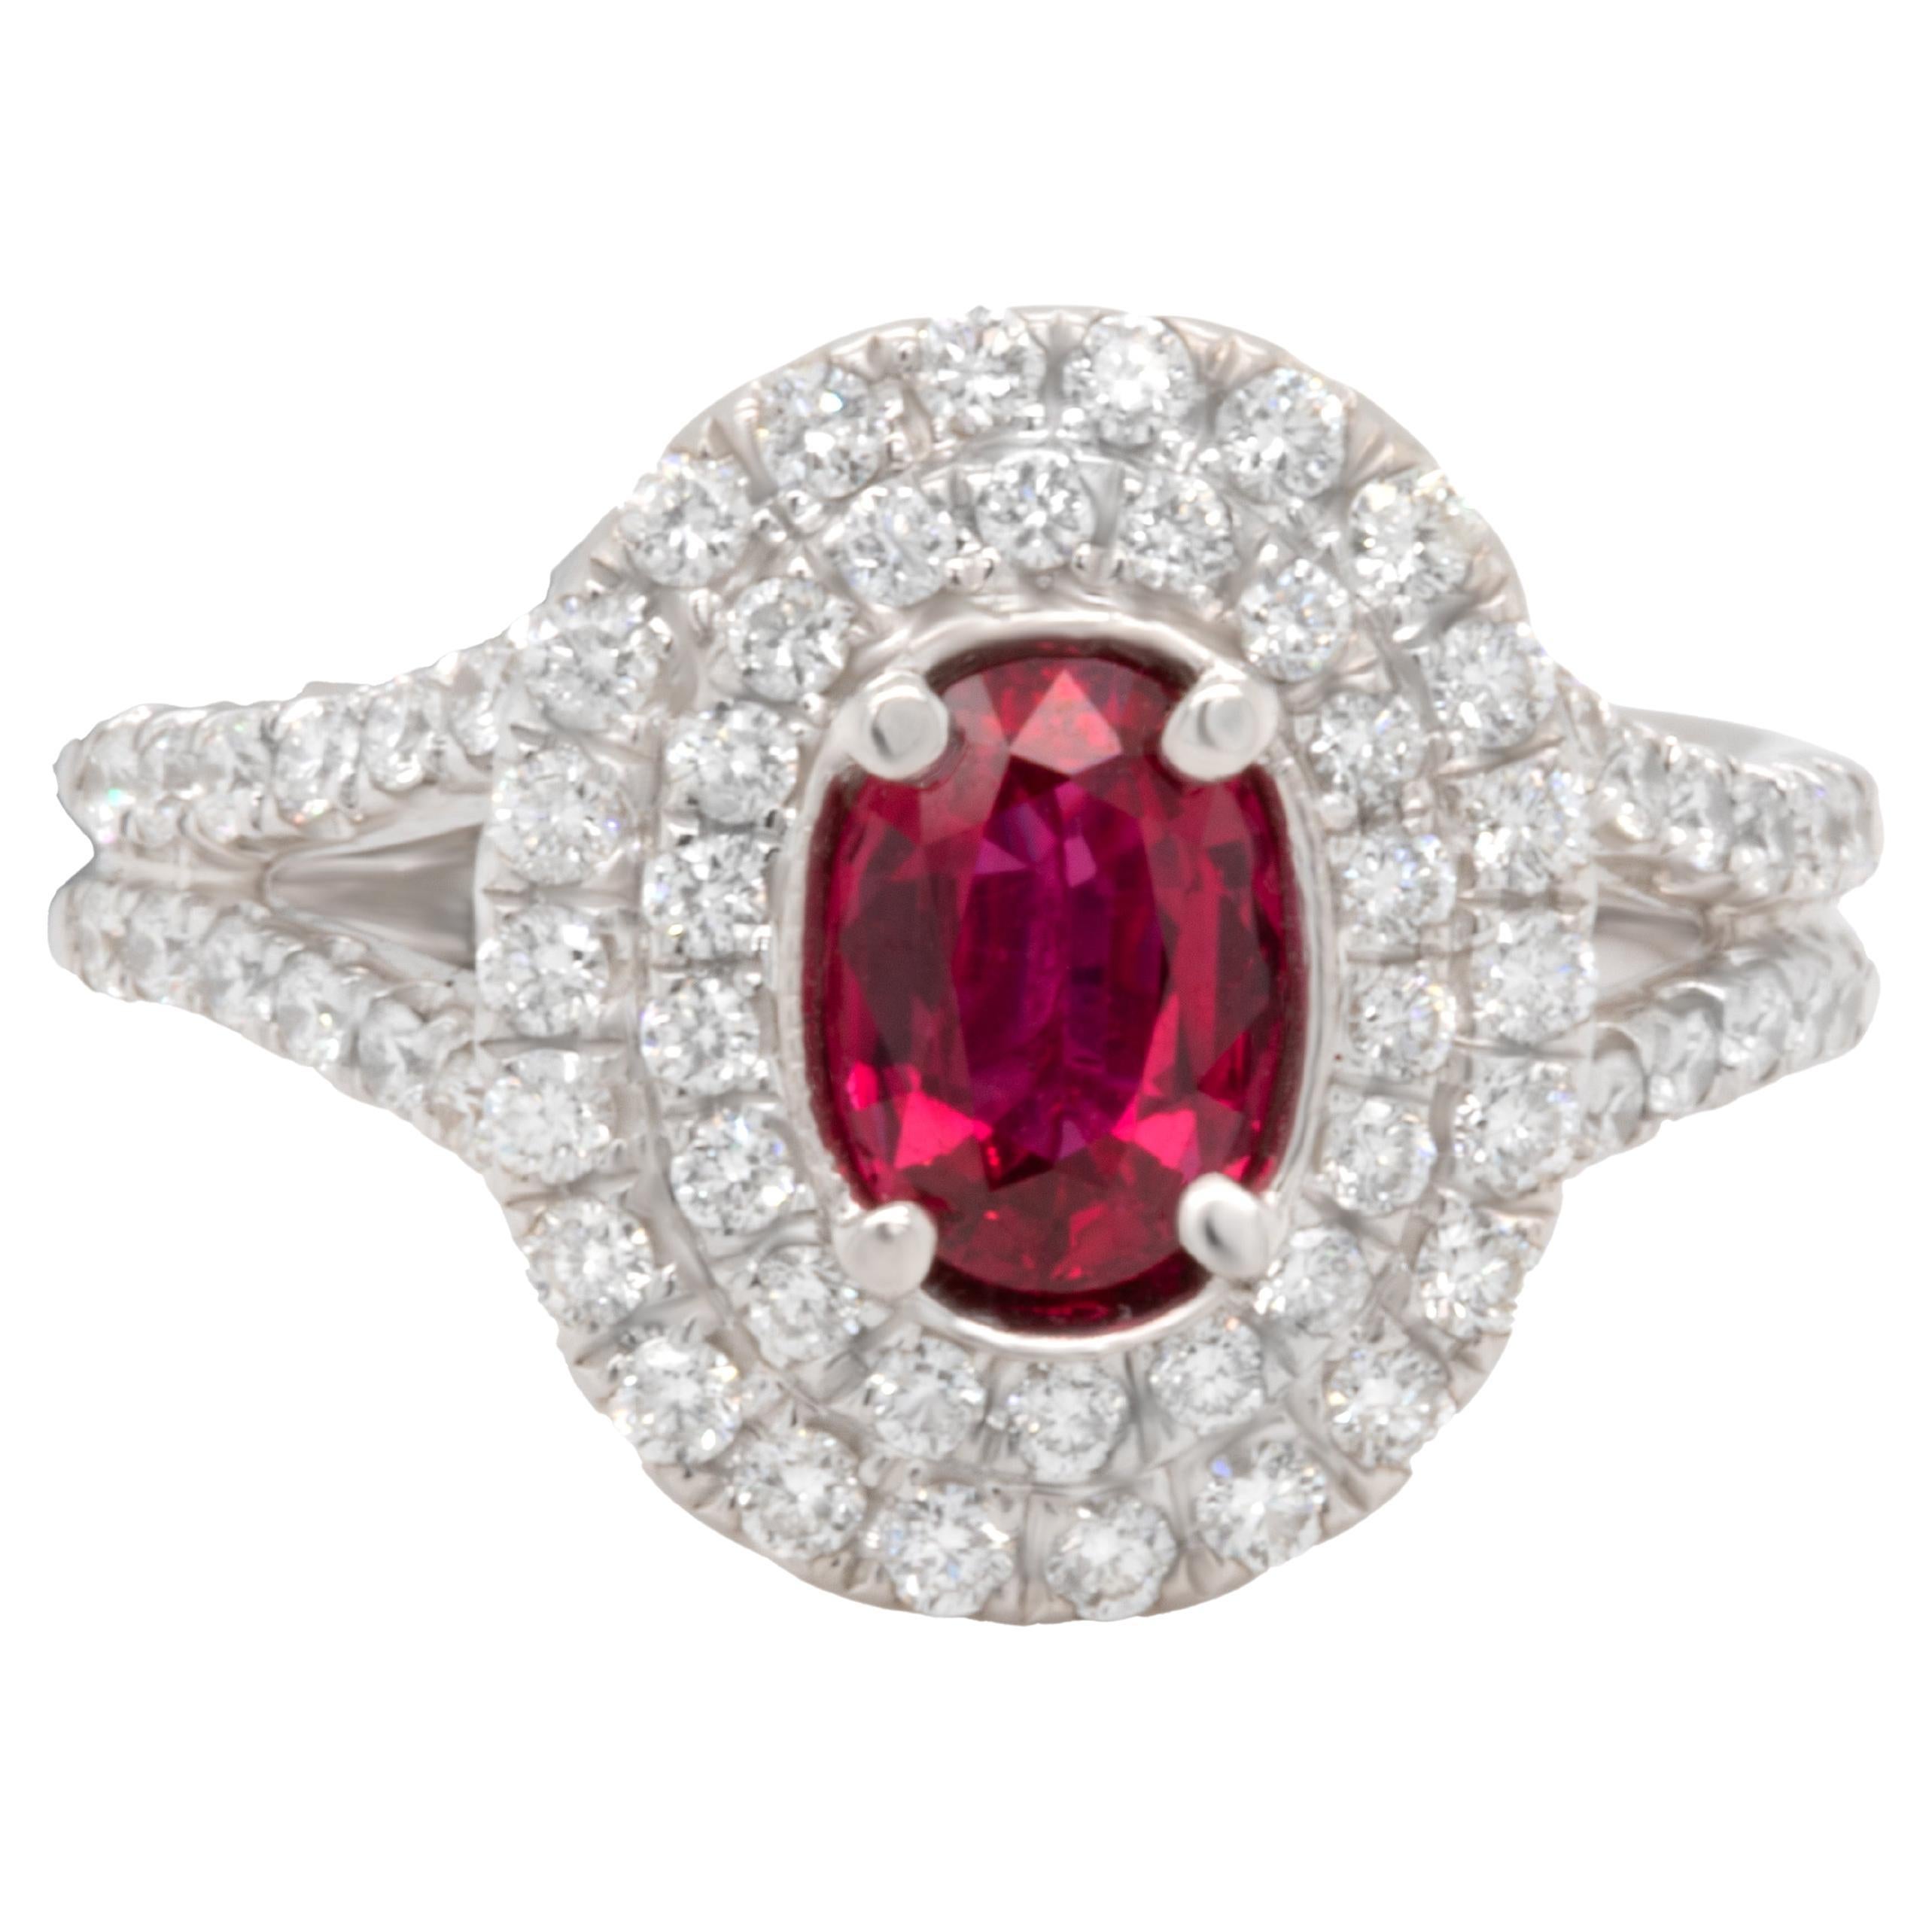 Burma Ruby Ring With Diamonds 1.57 Carats 18K White Gold